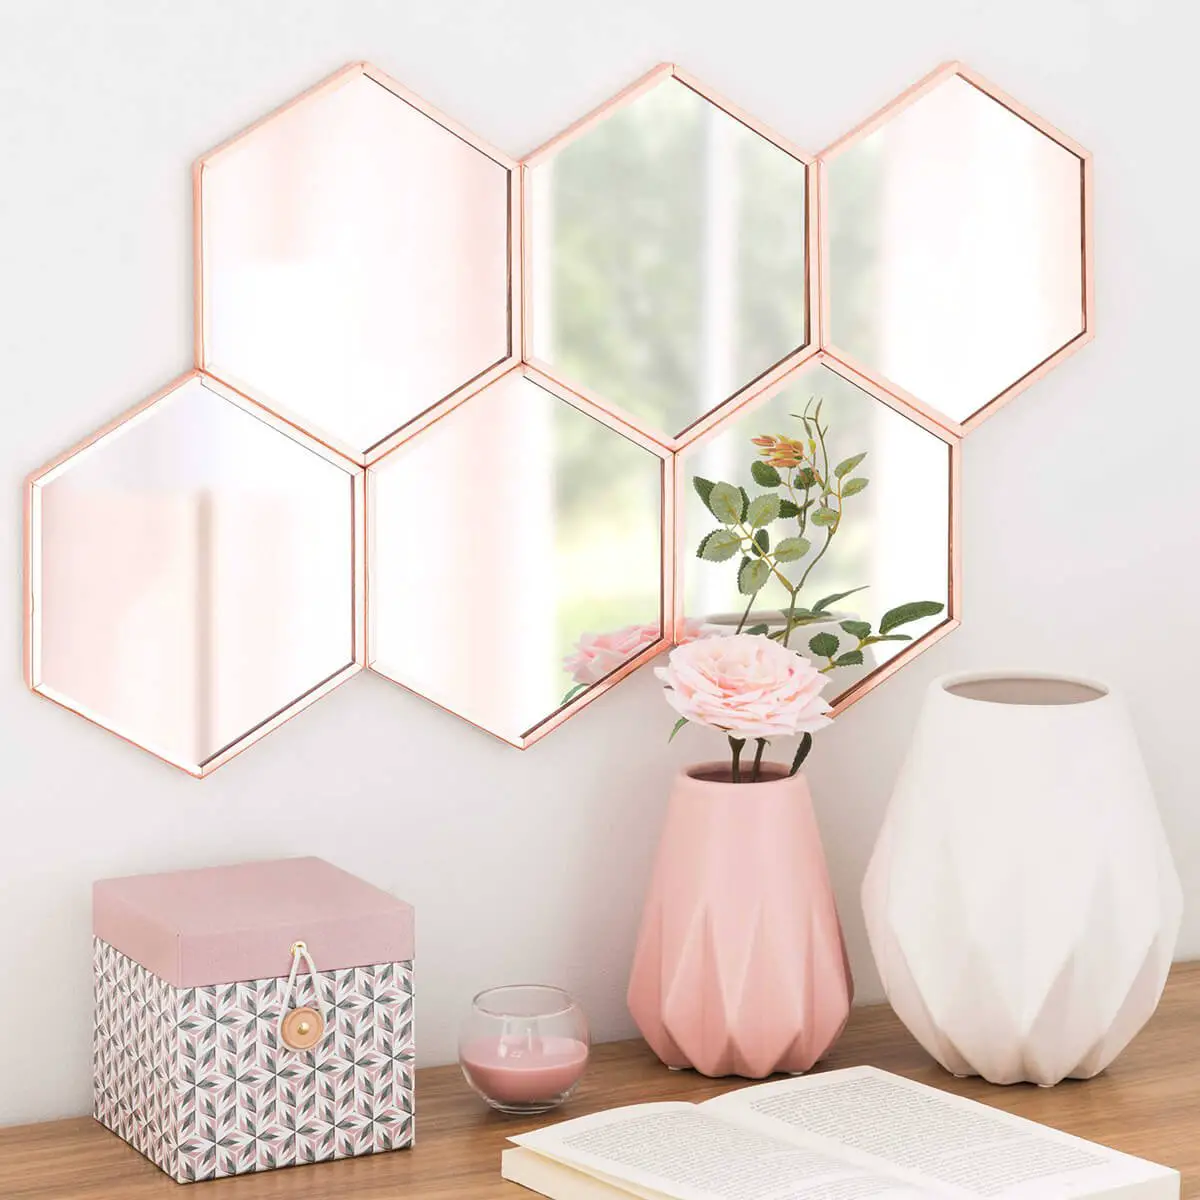 A pink hexagonal mirror on a wall with vases showcasing mirror ideas.